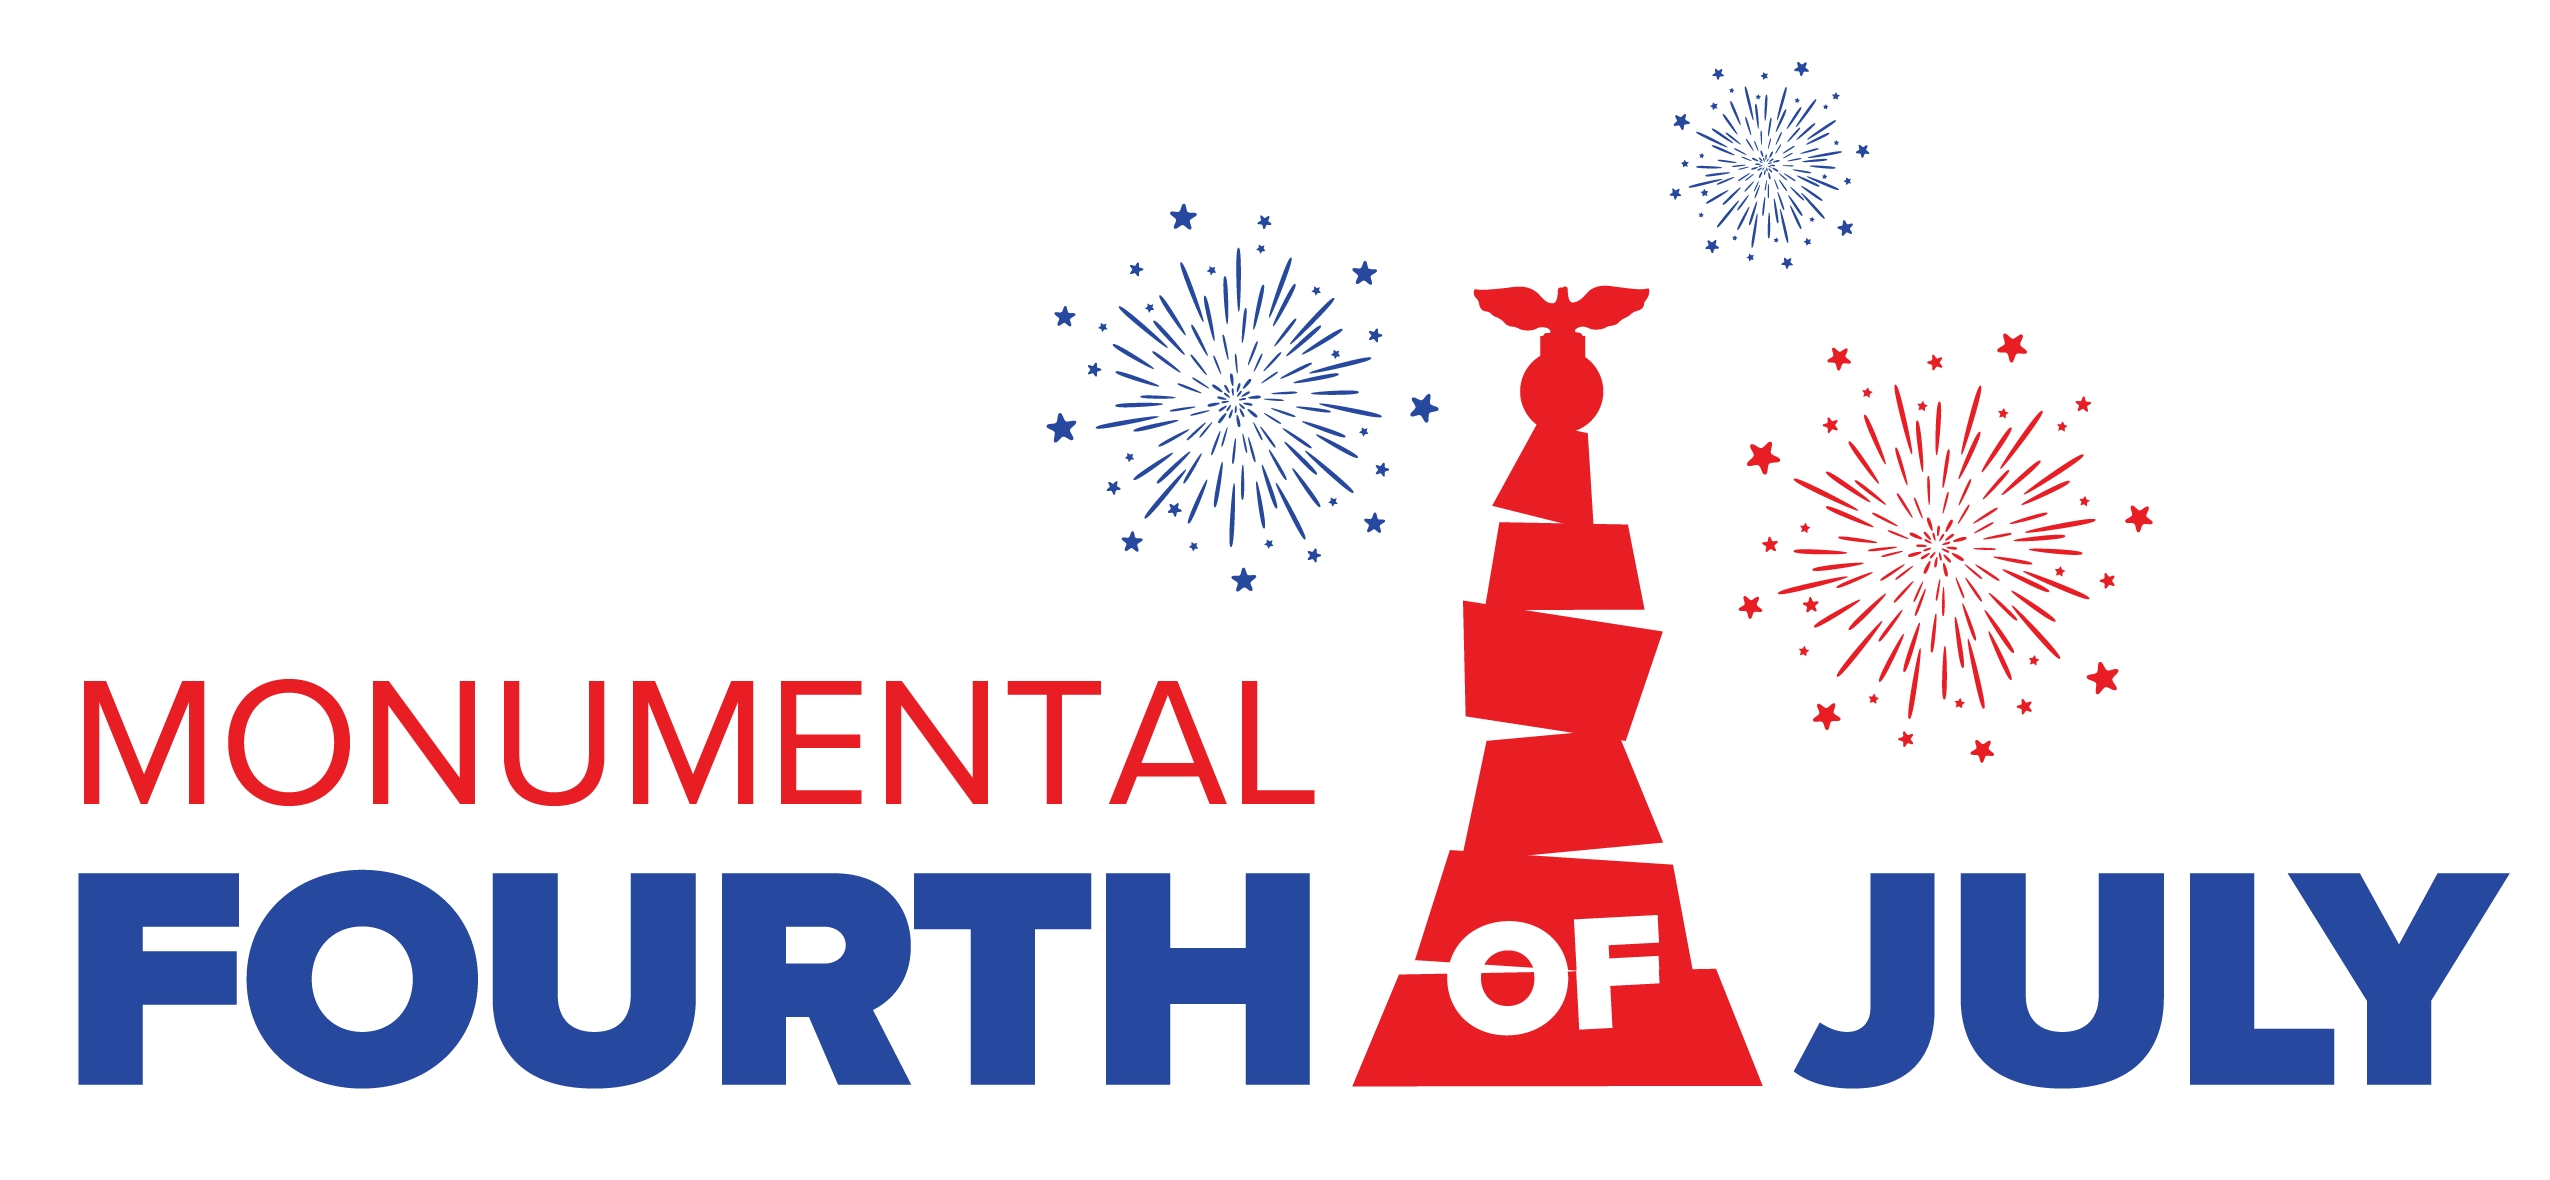 2023 Monumental 4th of July cover image